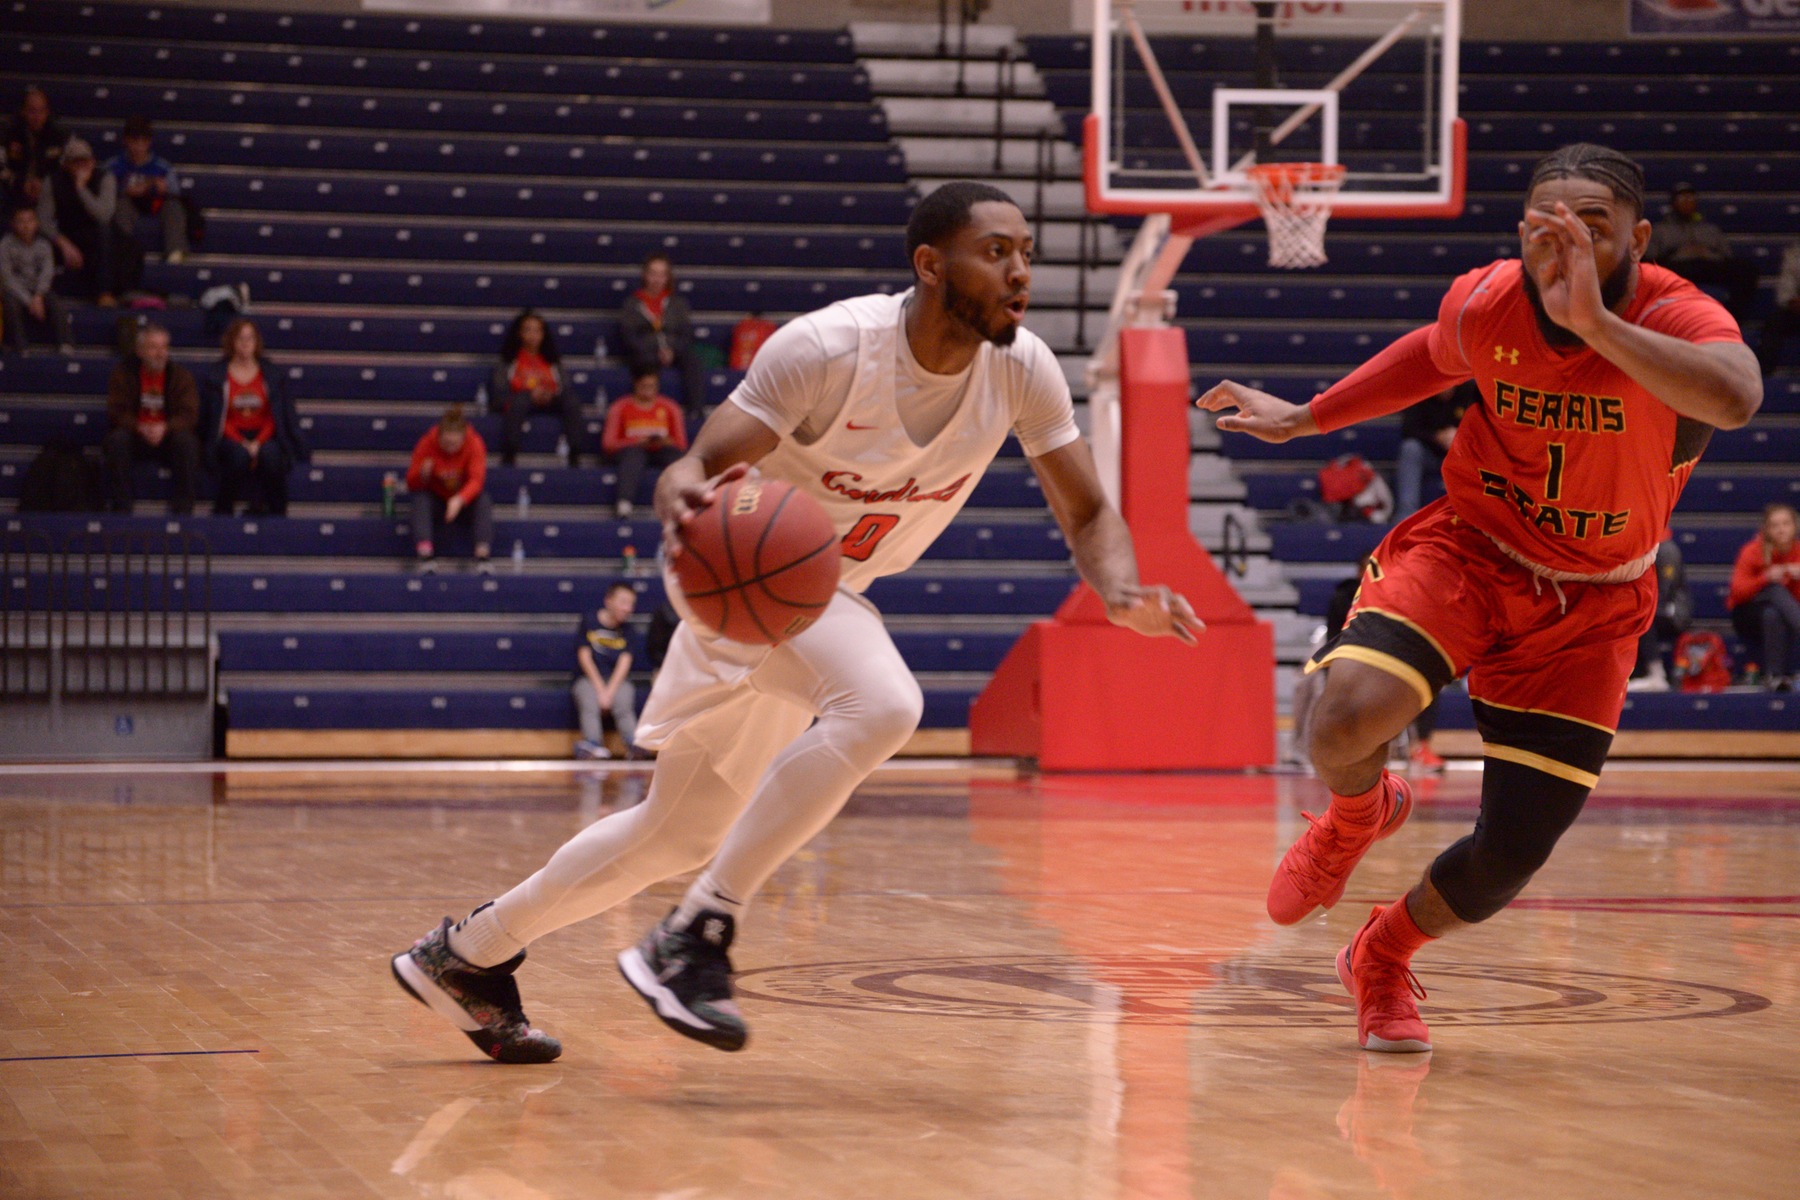 Bulldogs claim 92-70 victory over Cardinals in league action